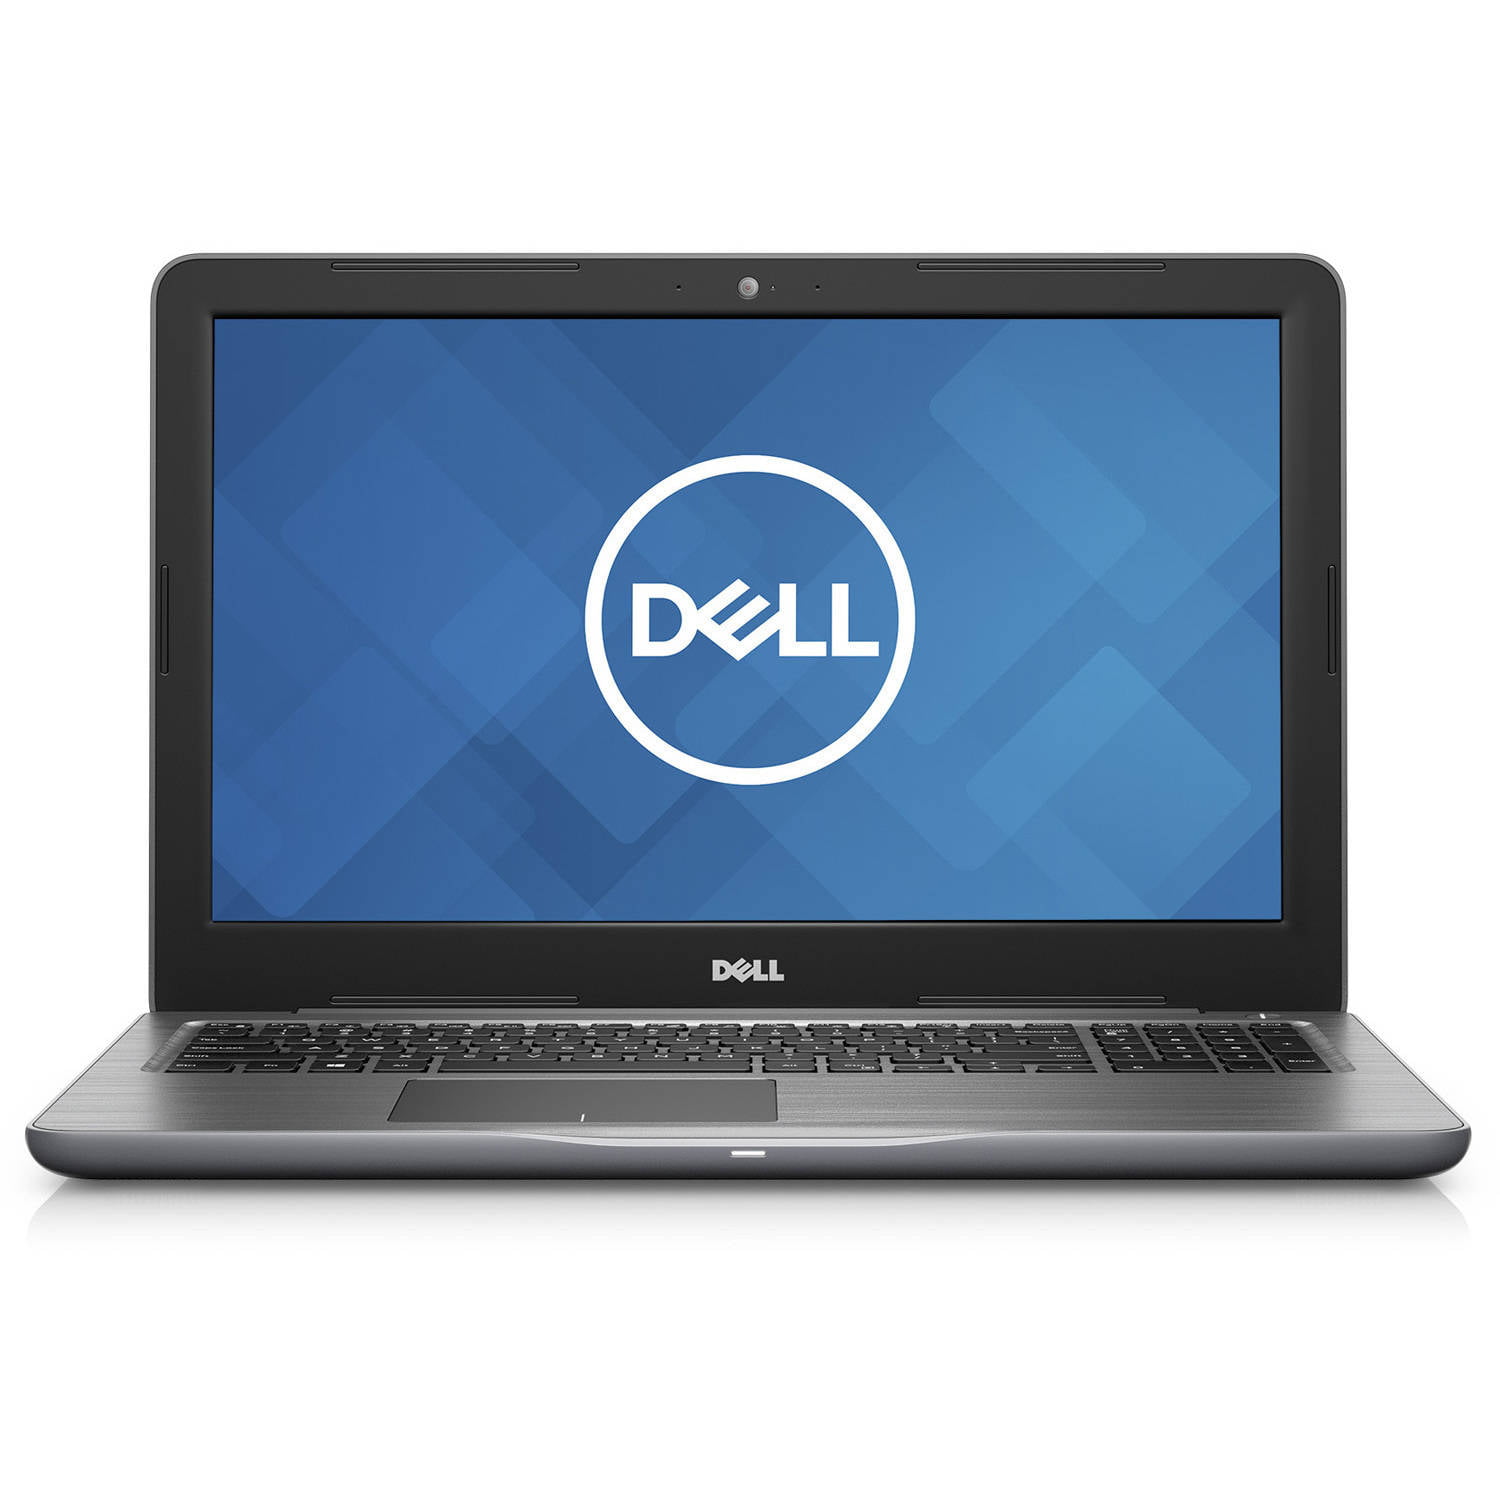 Dell Inspiron 15-5565 Notebook with AMD A12-9700P, 12GB 1TB HDD